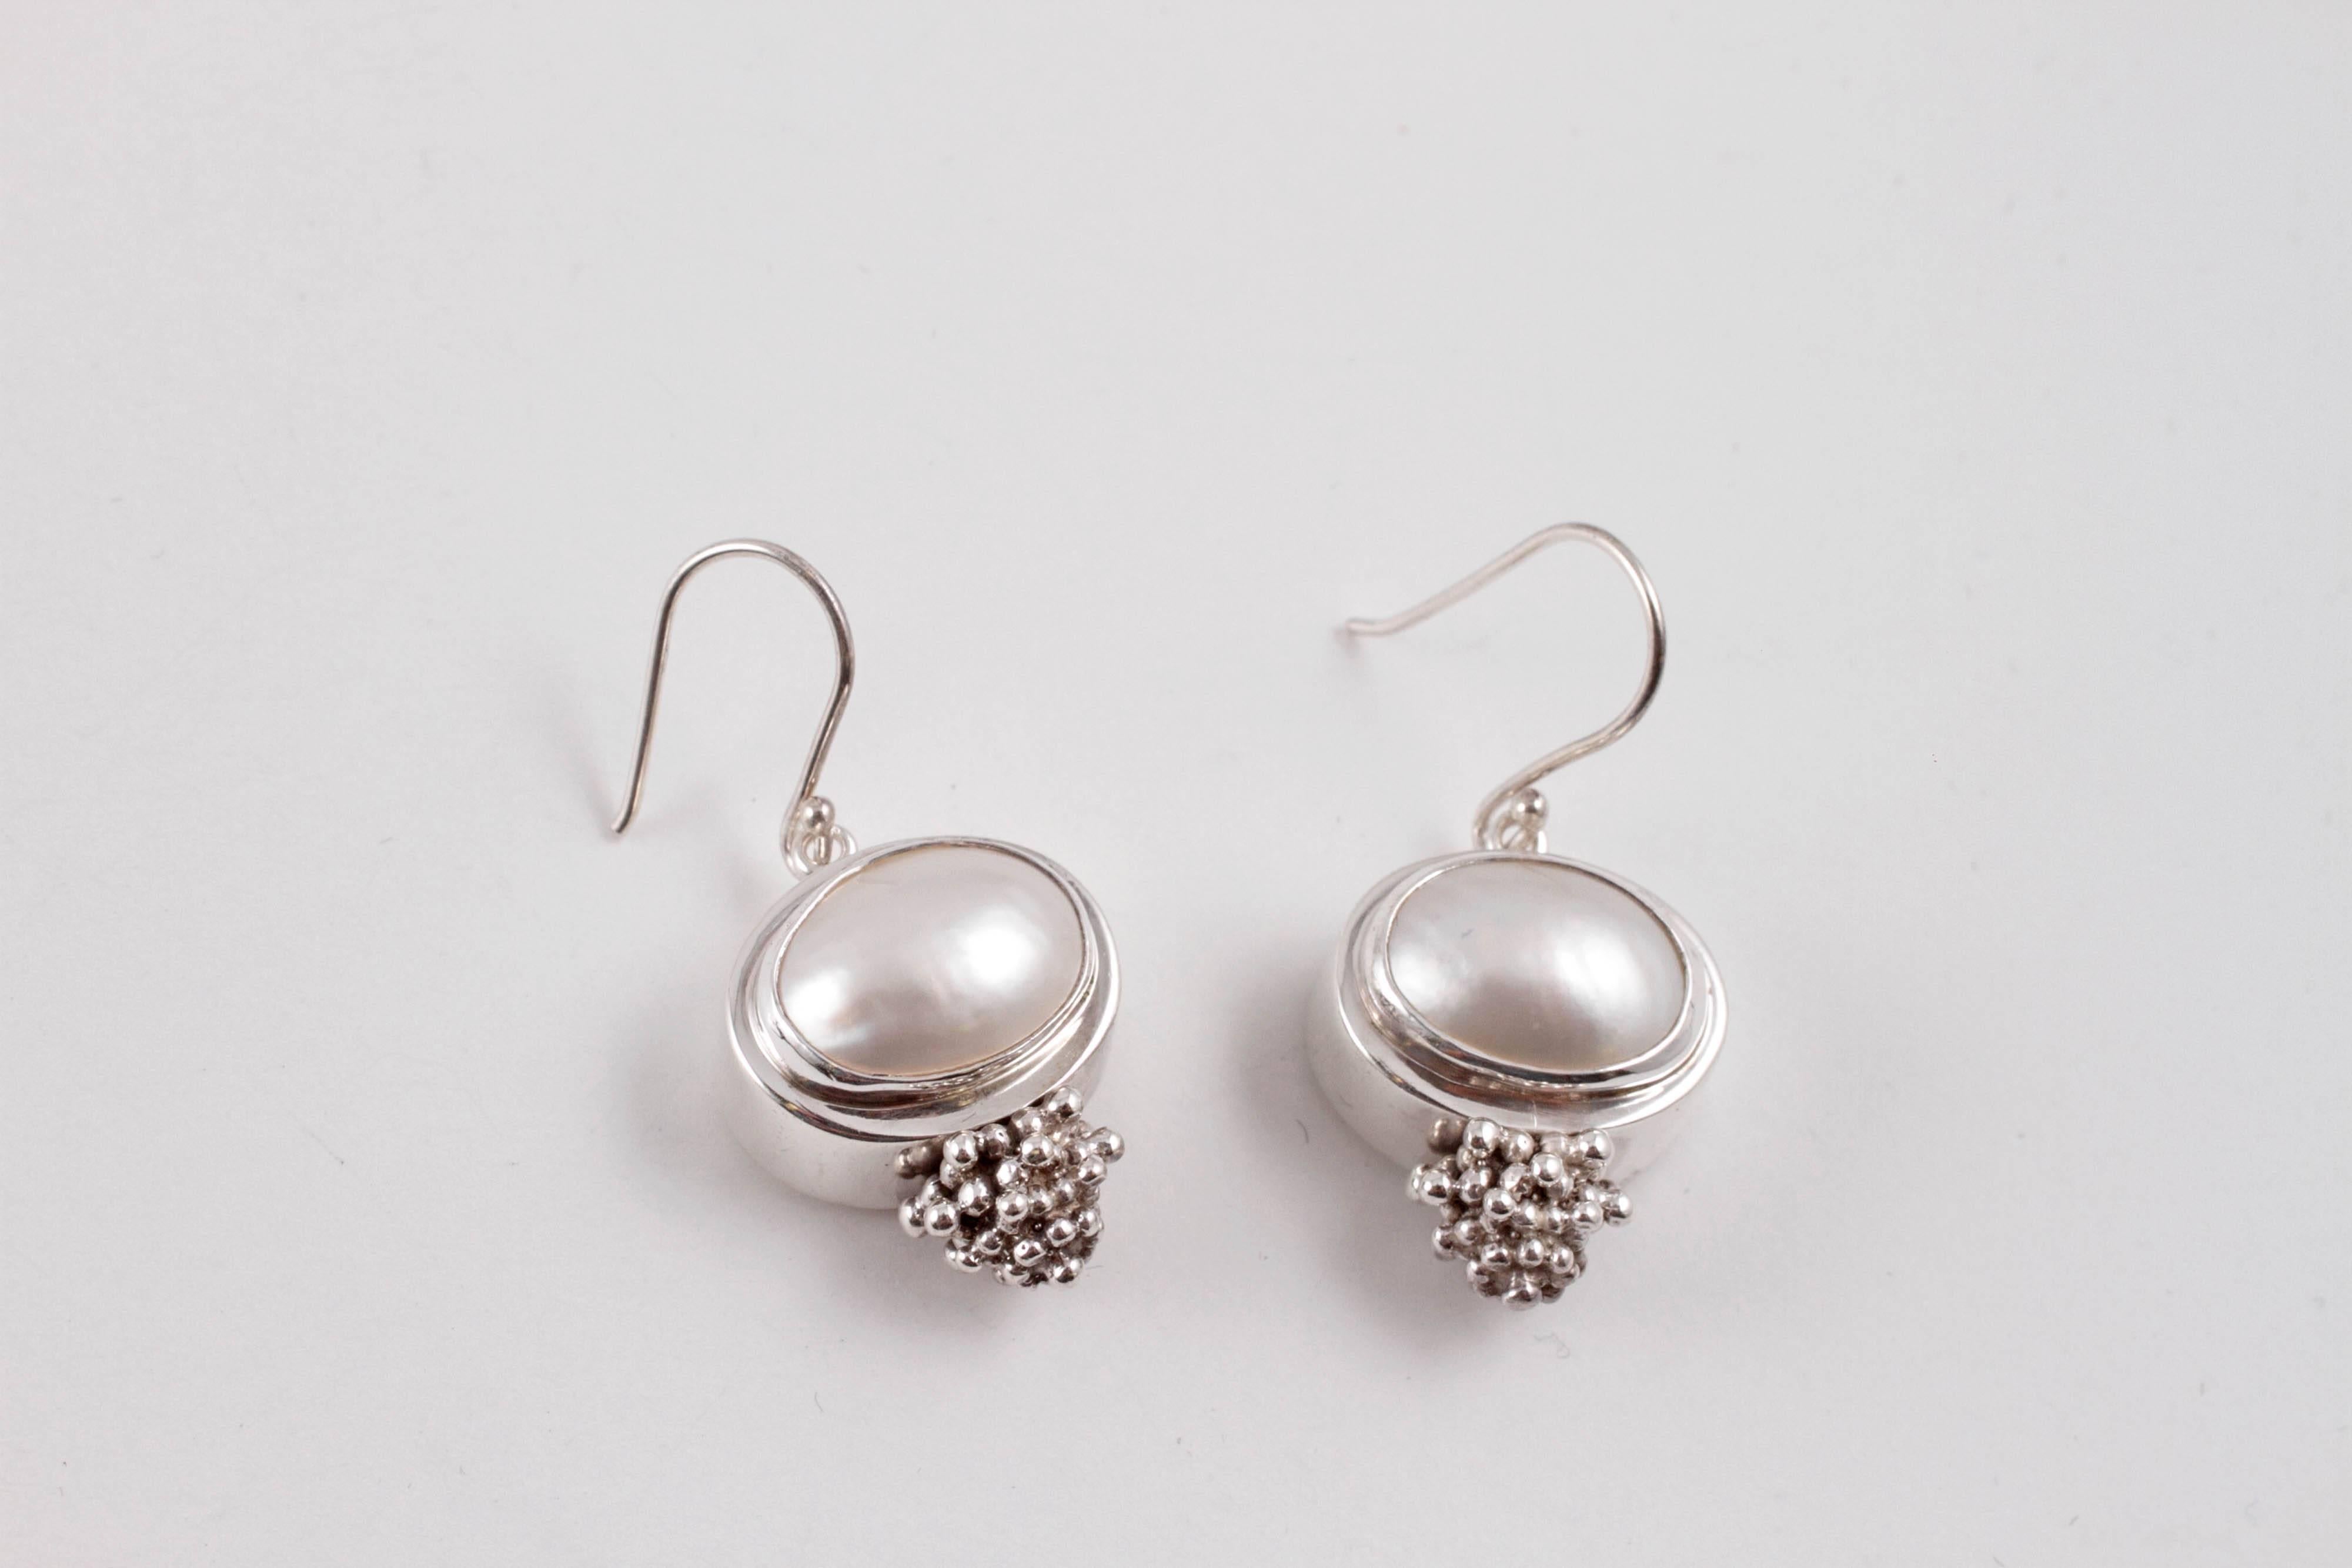 In sterling silver, these earrings are fun and light to wear!